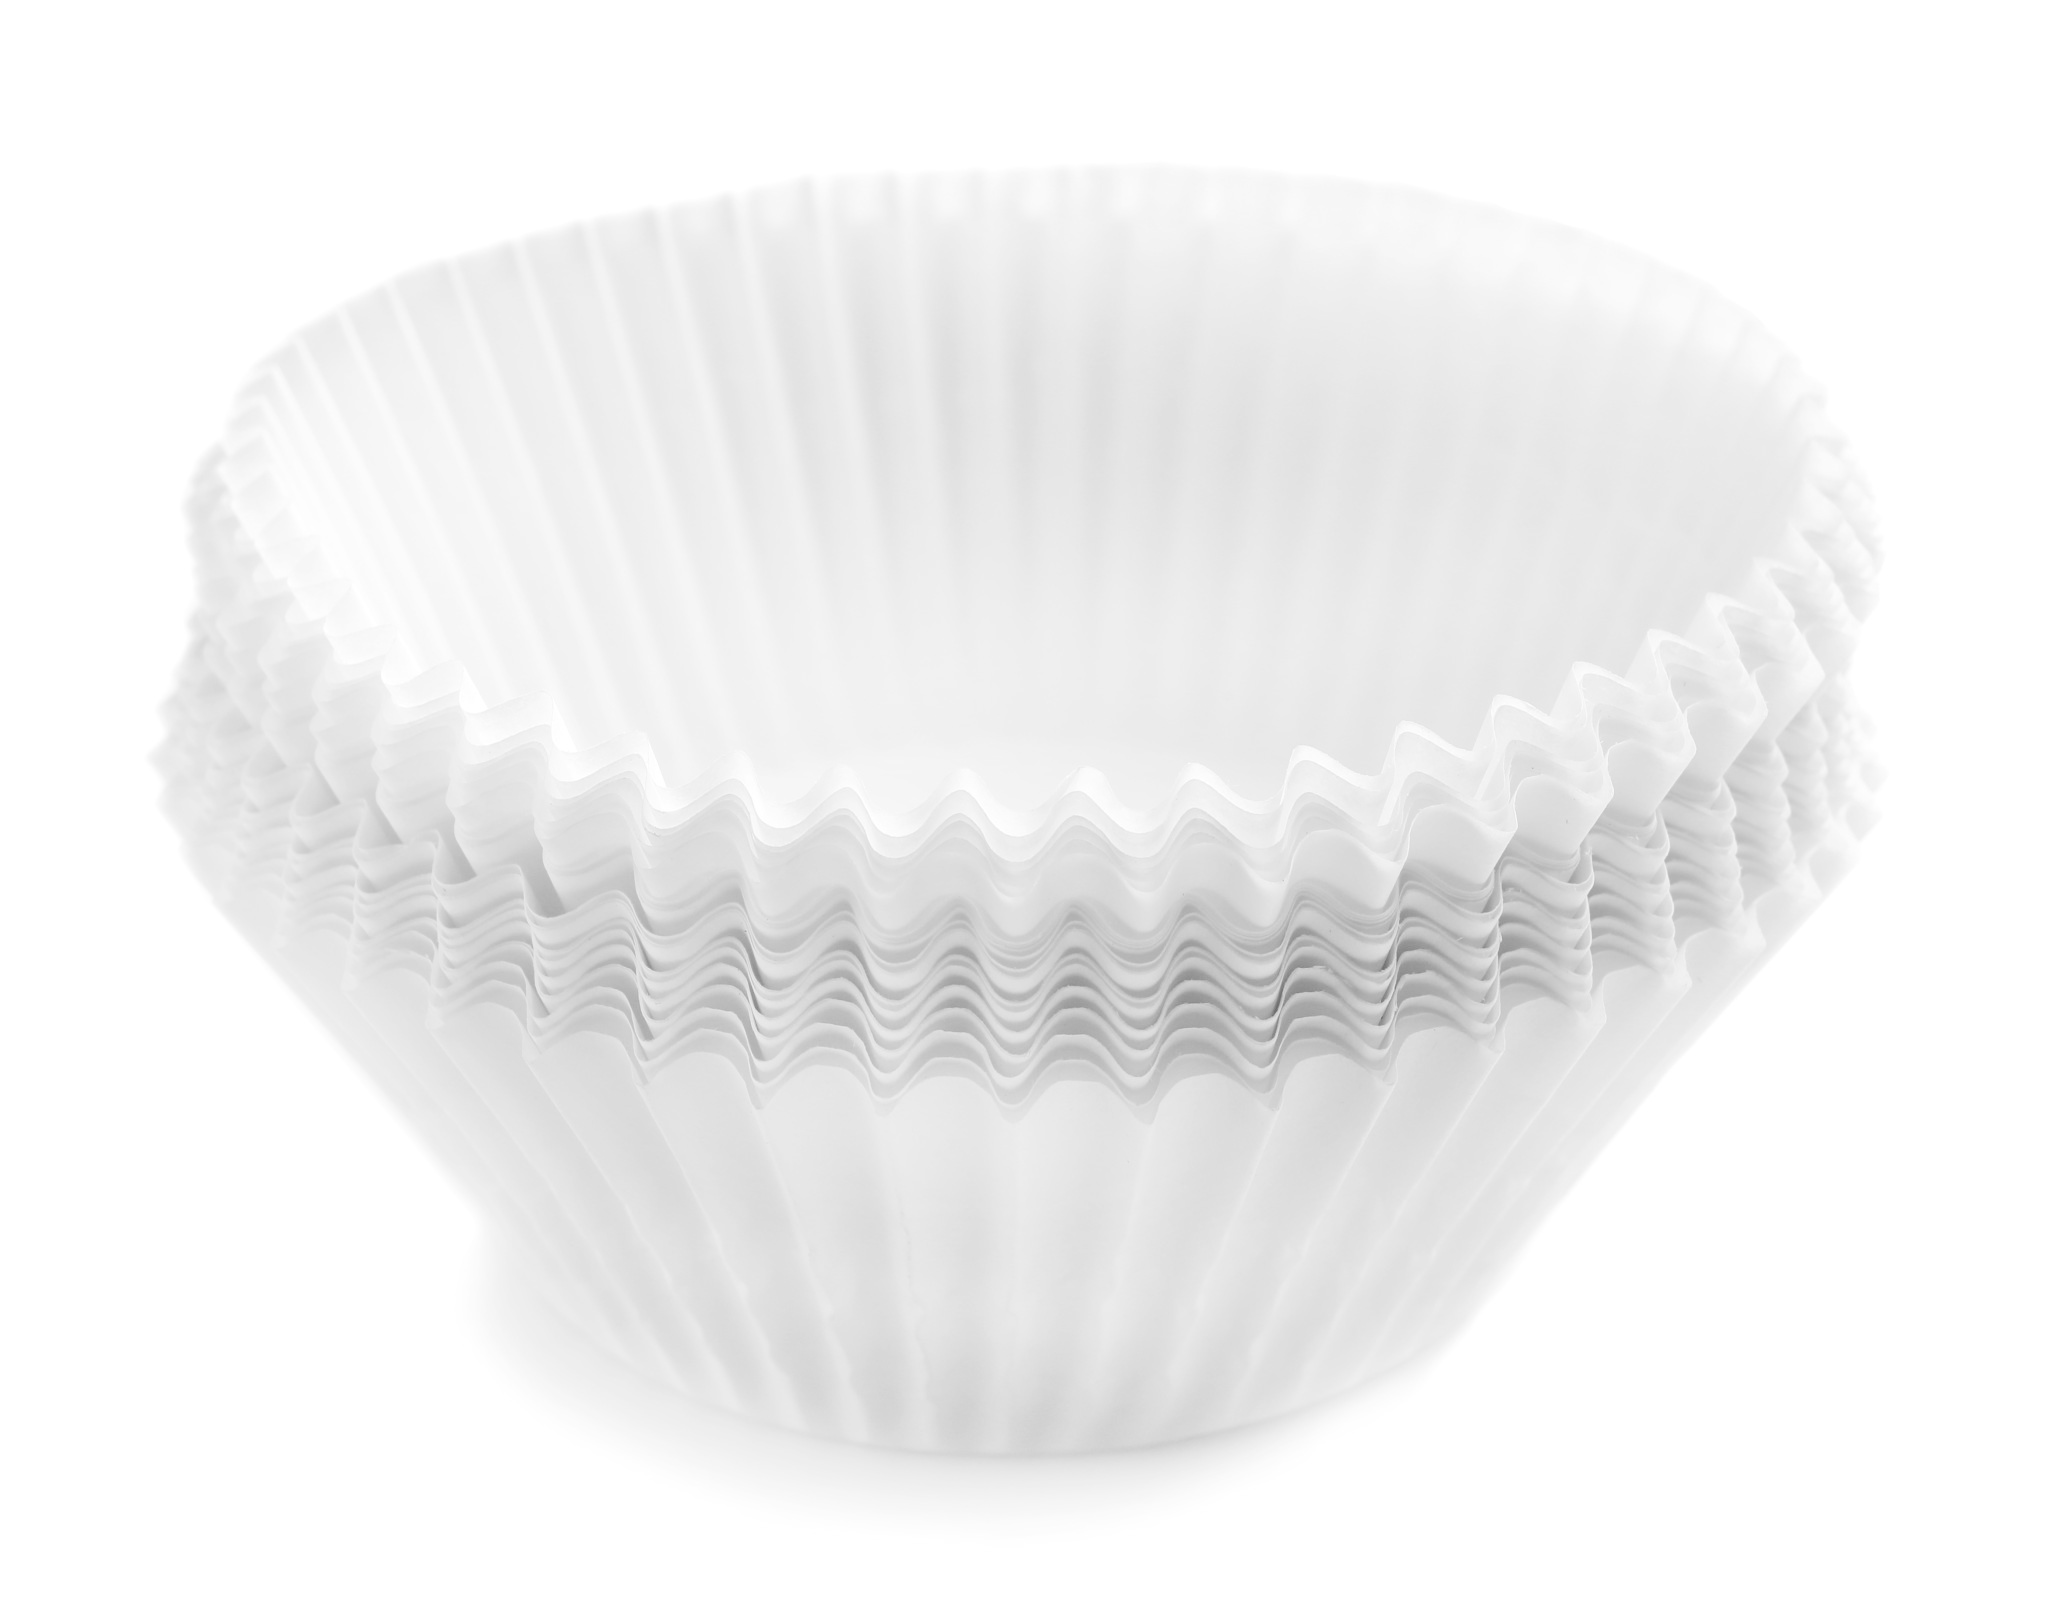 2 X 1-3/4 Taller Standard Size Greaseproof Baking Cup Baking Liner Baking  Cups Muffins Paper Liners White Baking Cup 